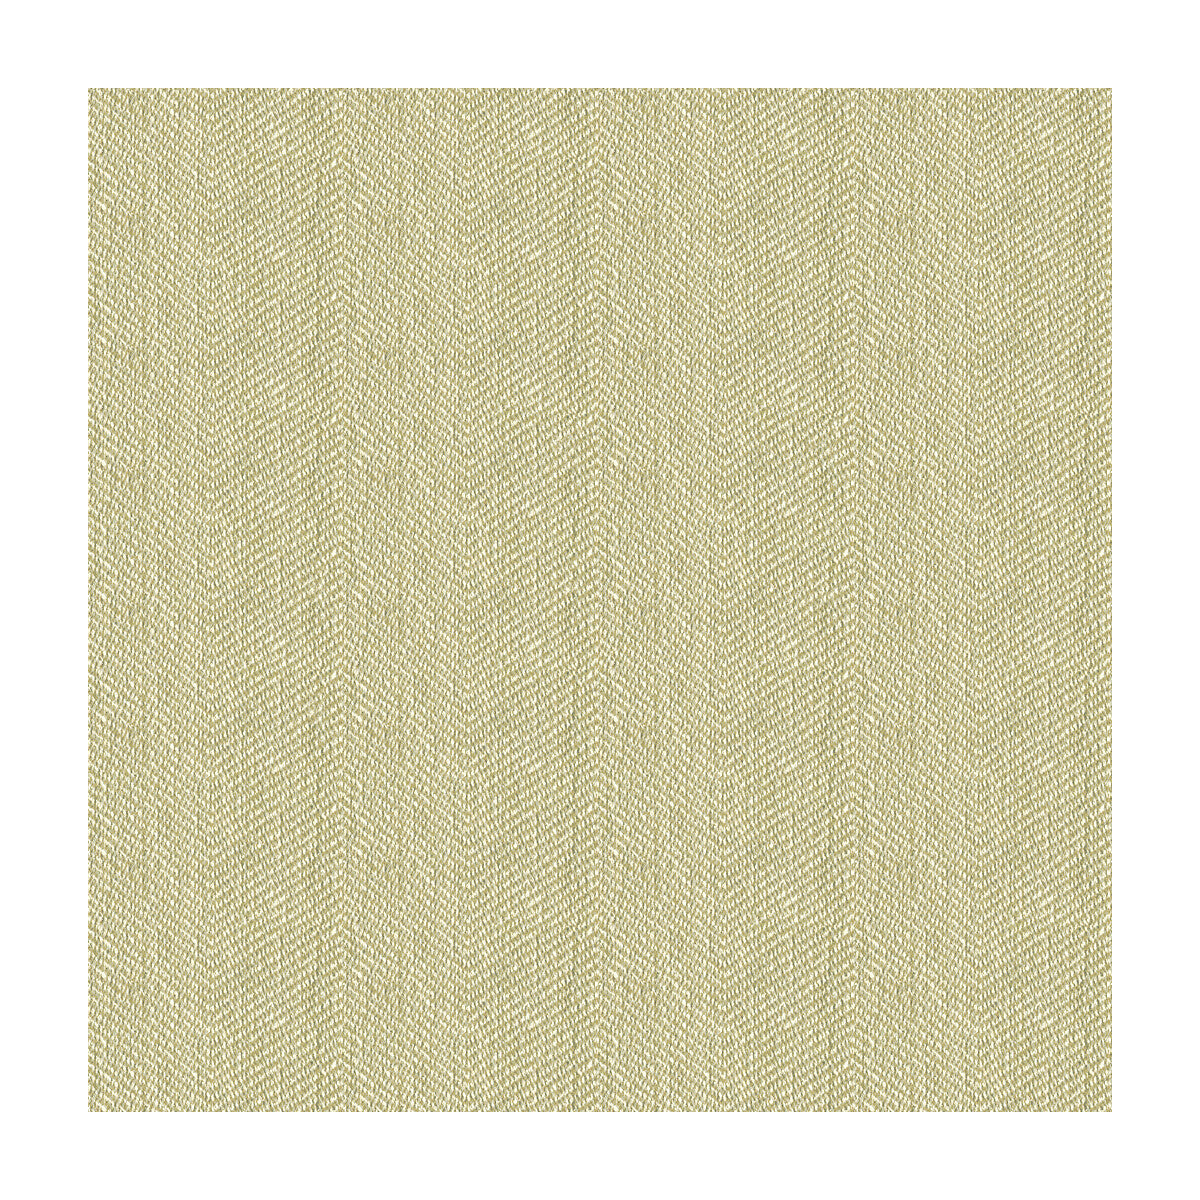 Kravet Smart fabric in 33832-1111 color - pattern 33832.1111.0 - by Kravet Smart in the Performance Crypton Home collection